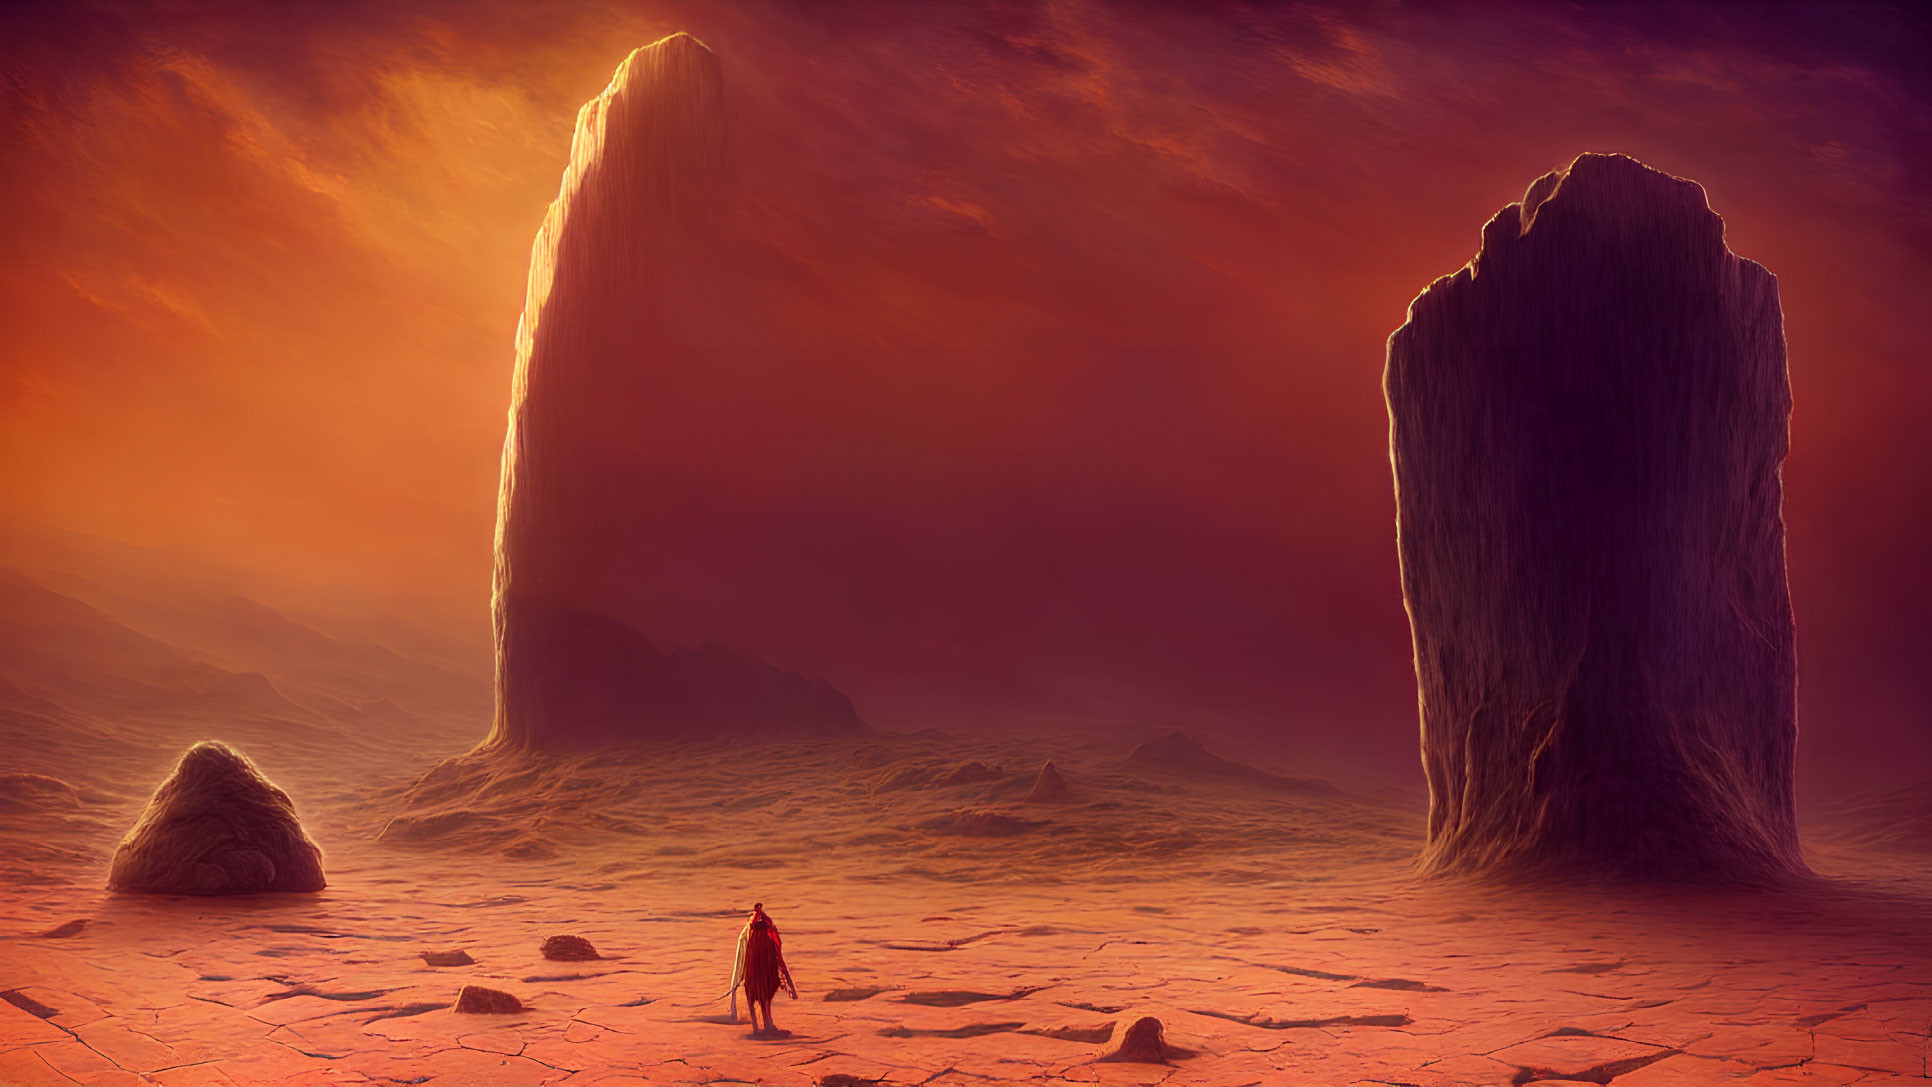 Cloaked figure on barren landscape with red sky